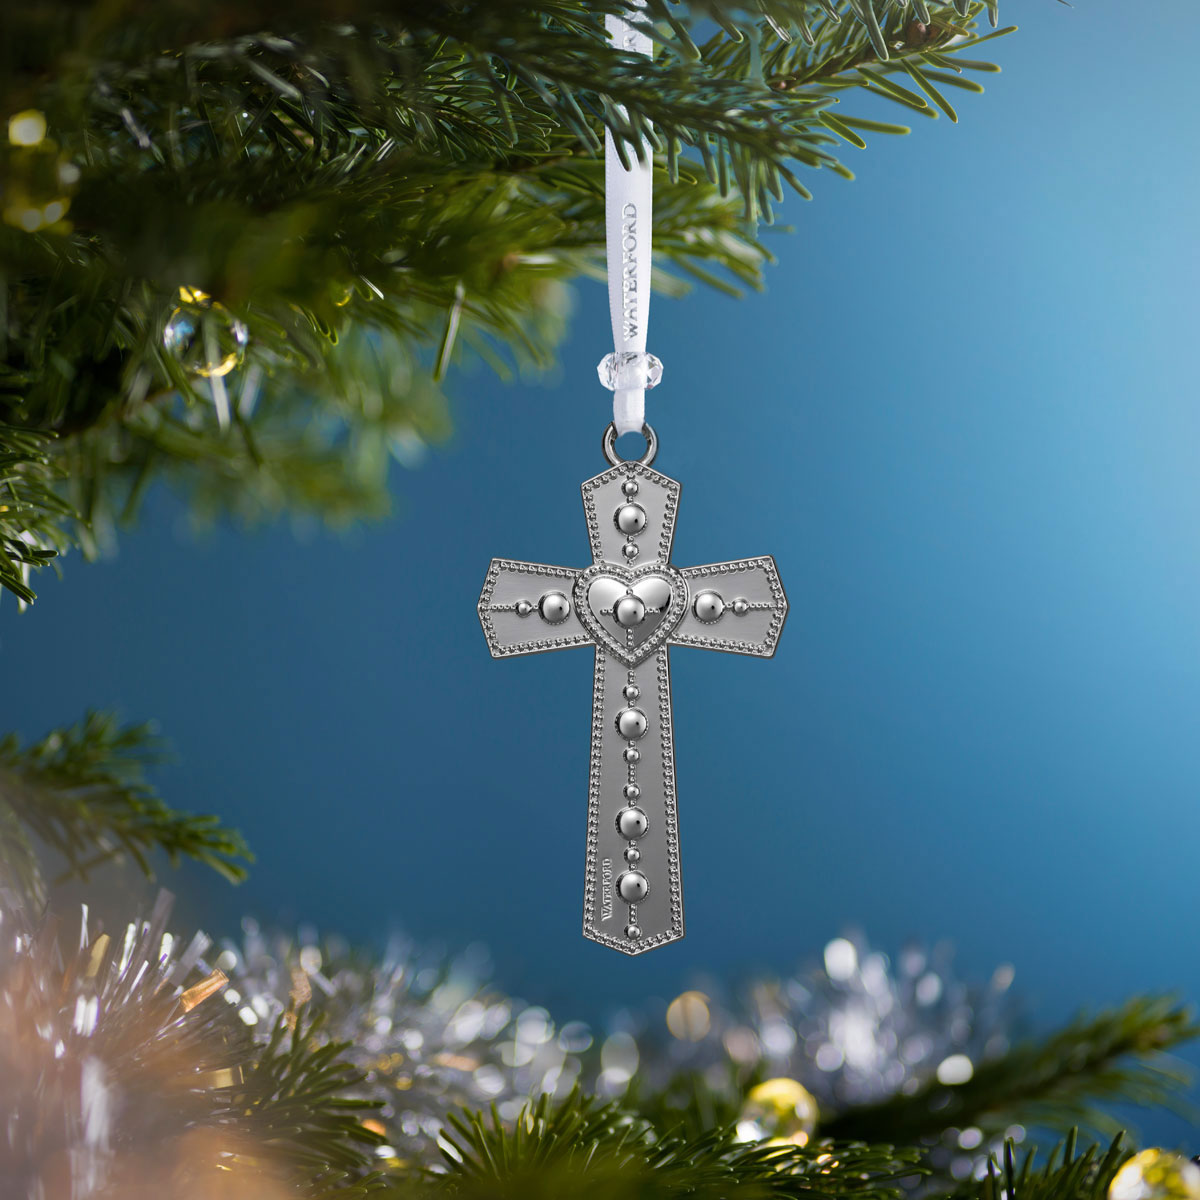 Waterford 2022 Silver Cross Ornament